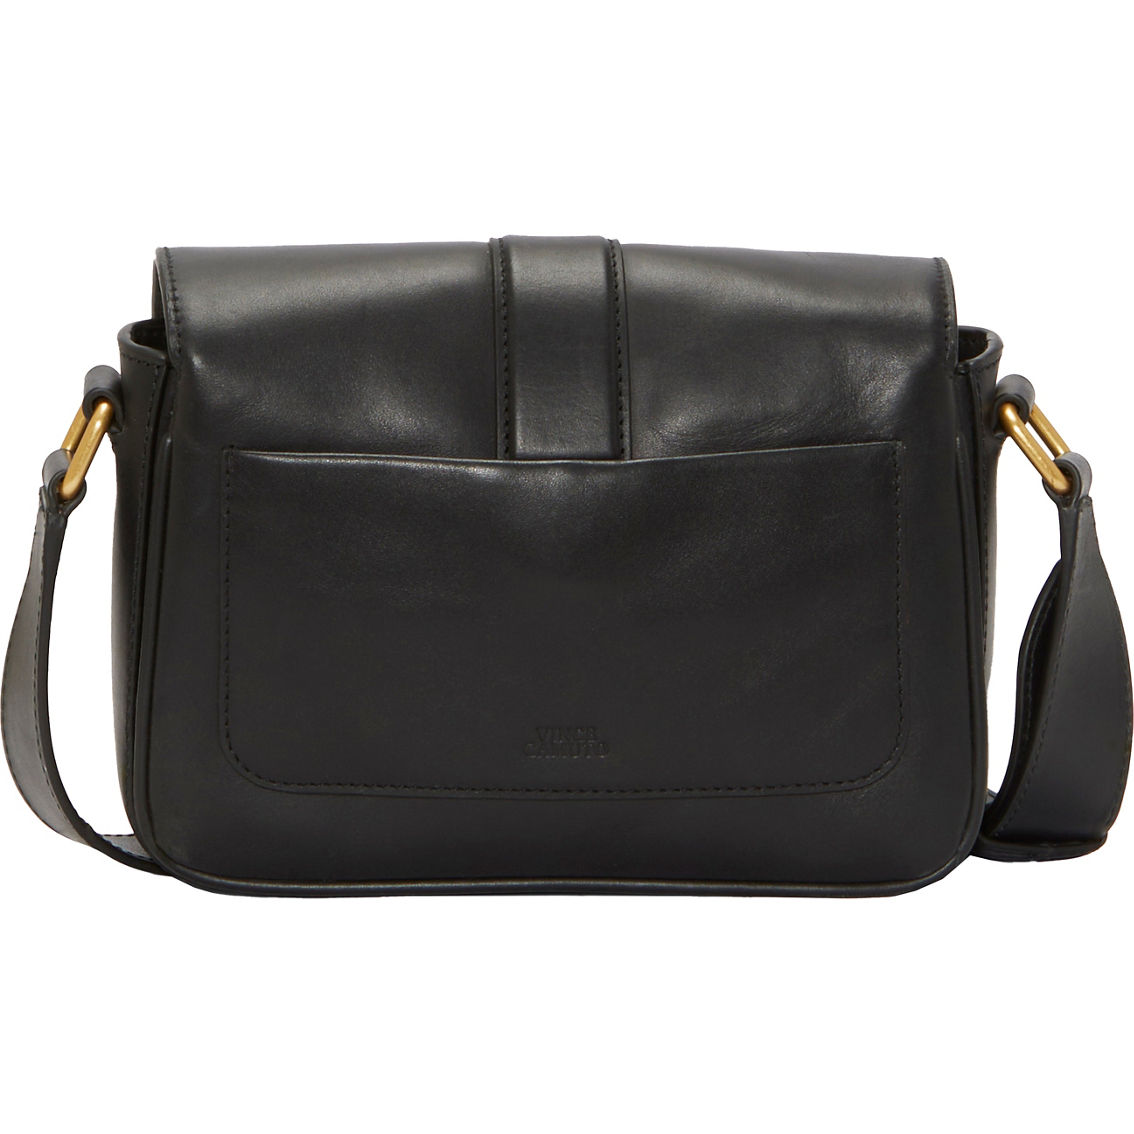 Vince Camuto Maecy Crossbody, Black - Image 3 of 4